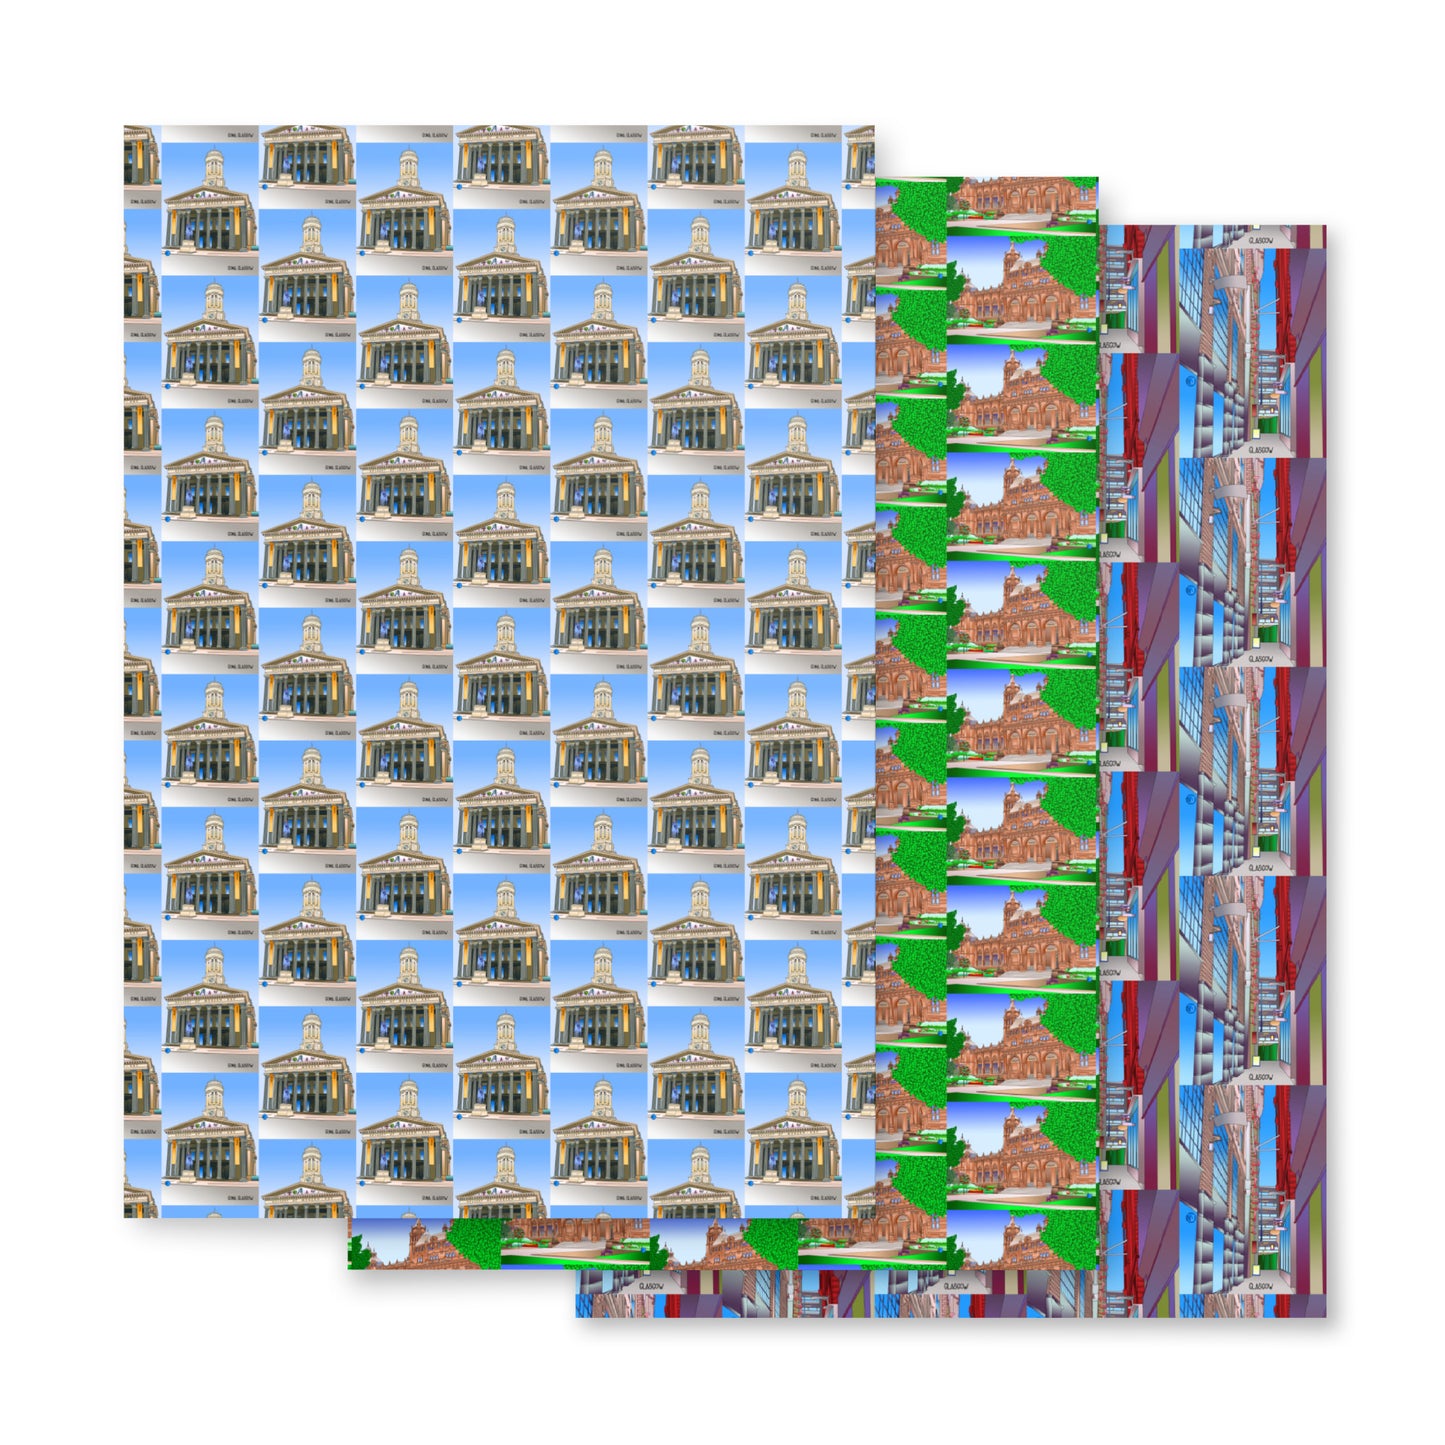 Glasgow Art Gallery Wrapping Paper x 3 Sheets - GOMA / Kelvingrove / The Light House